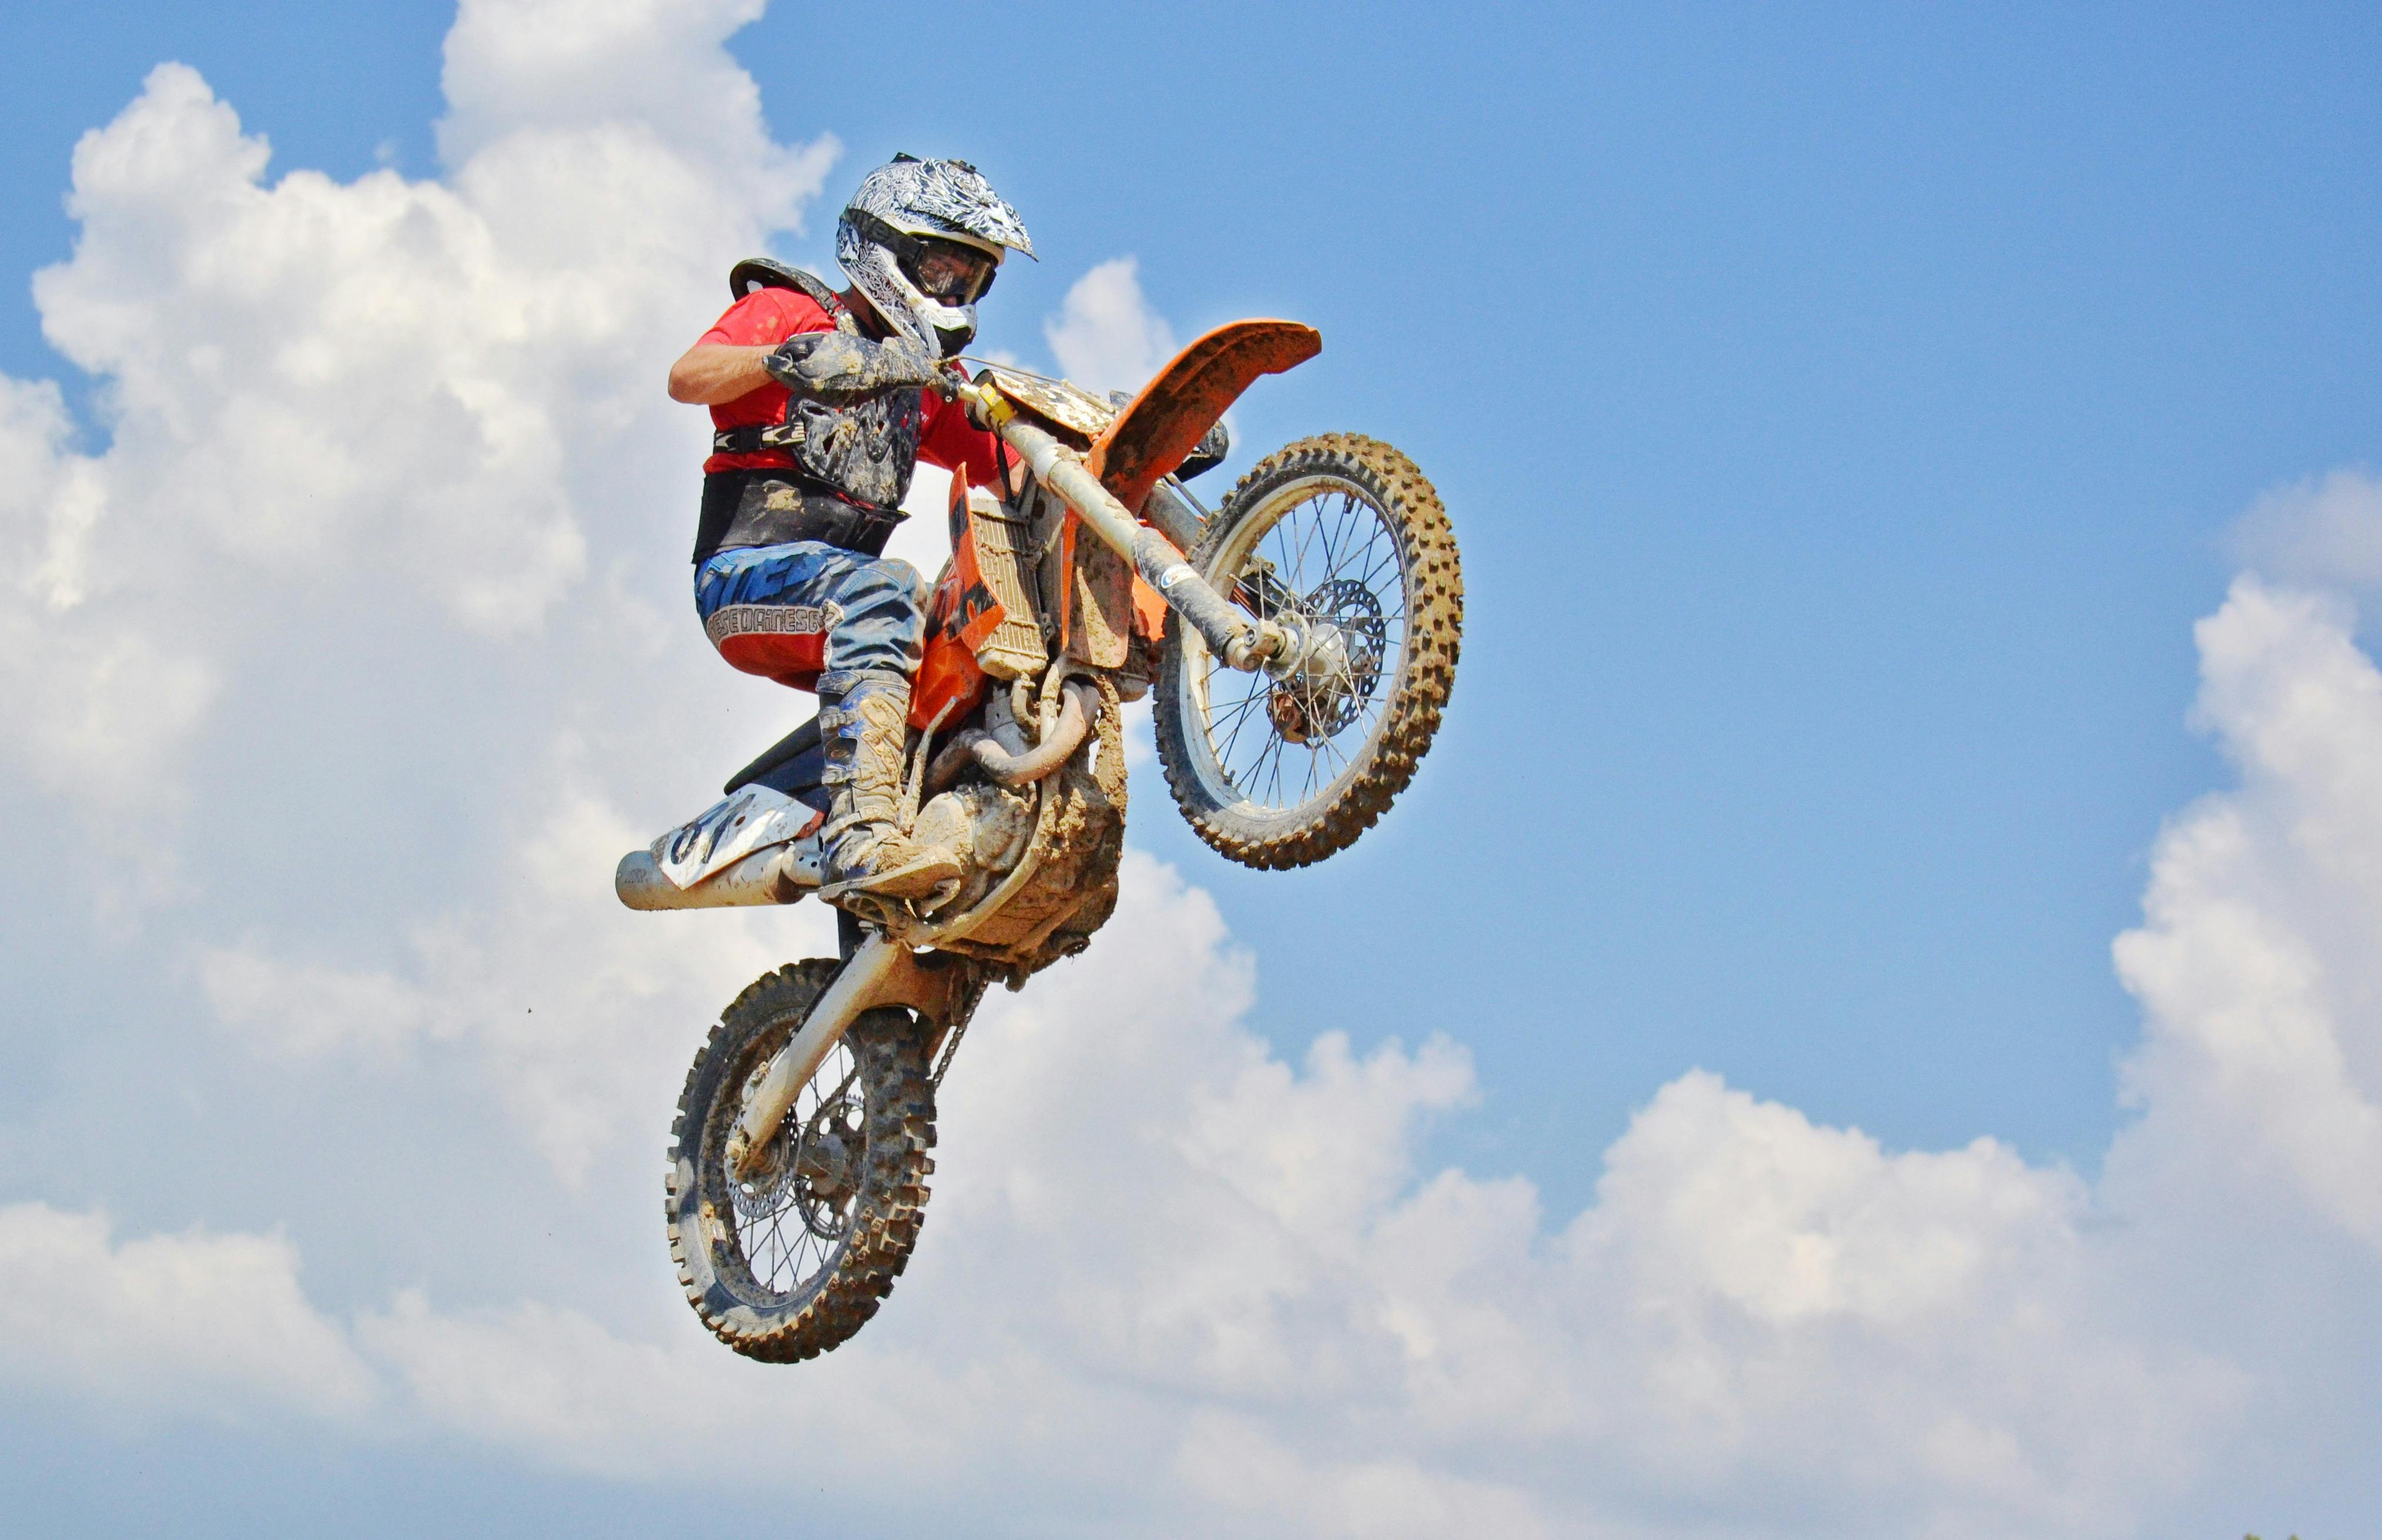 Motocross Photos, Download The BEST Free Motocross Stock Photos & HD Images